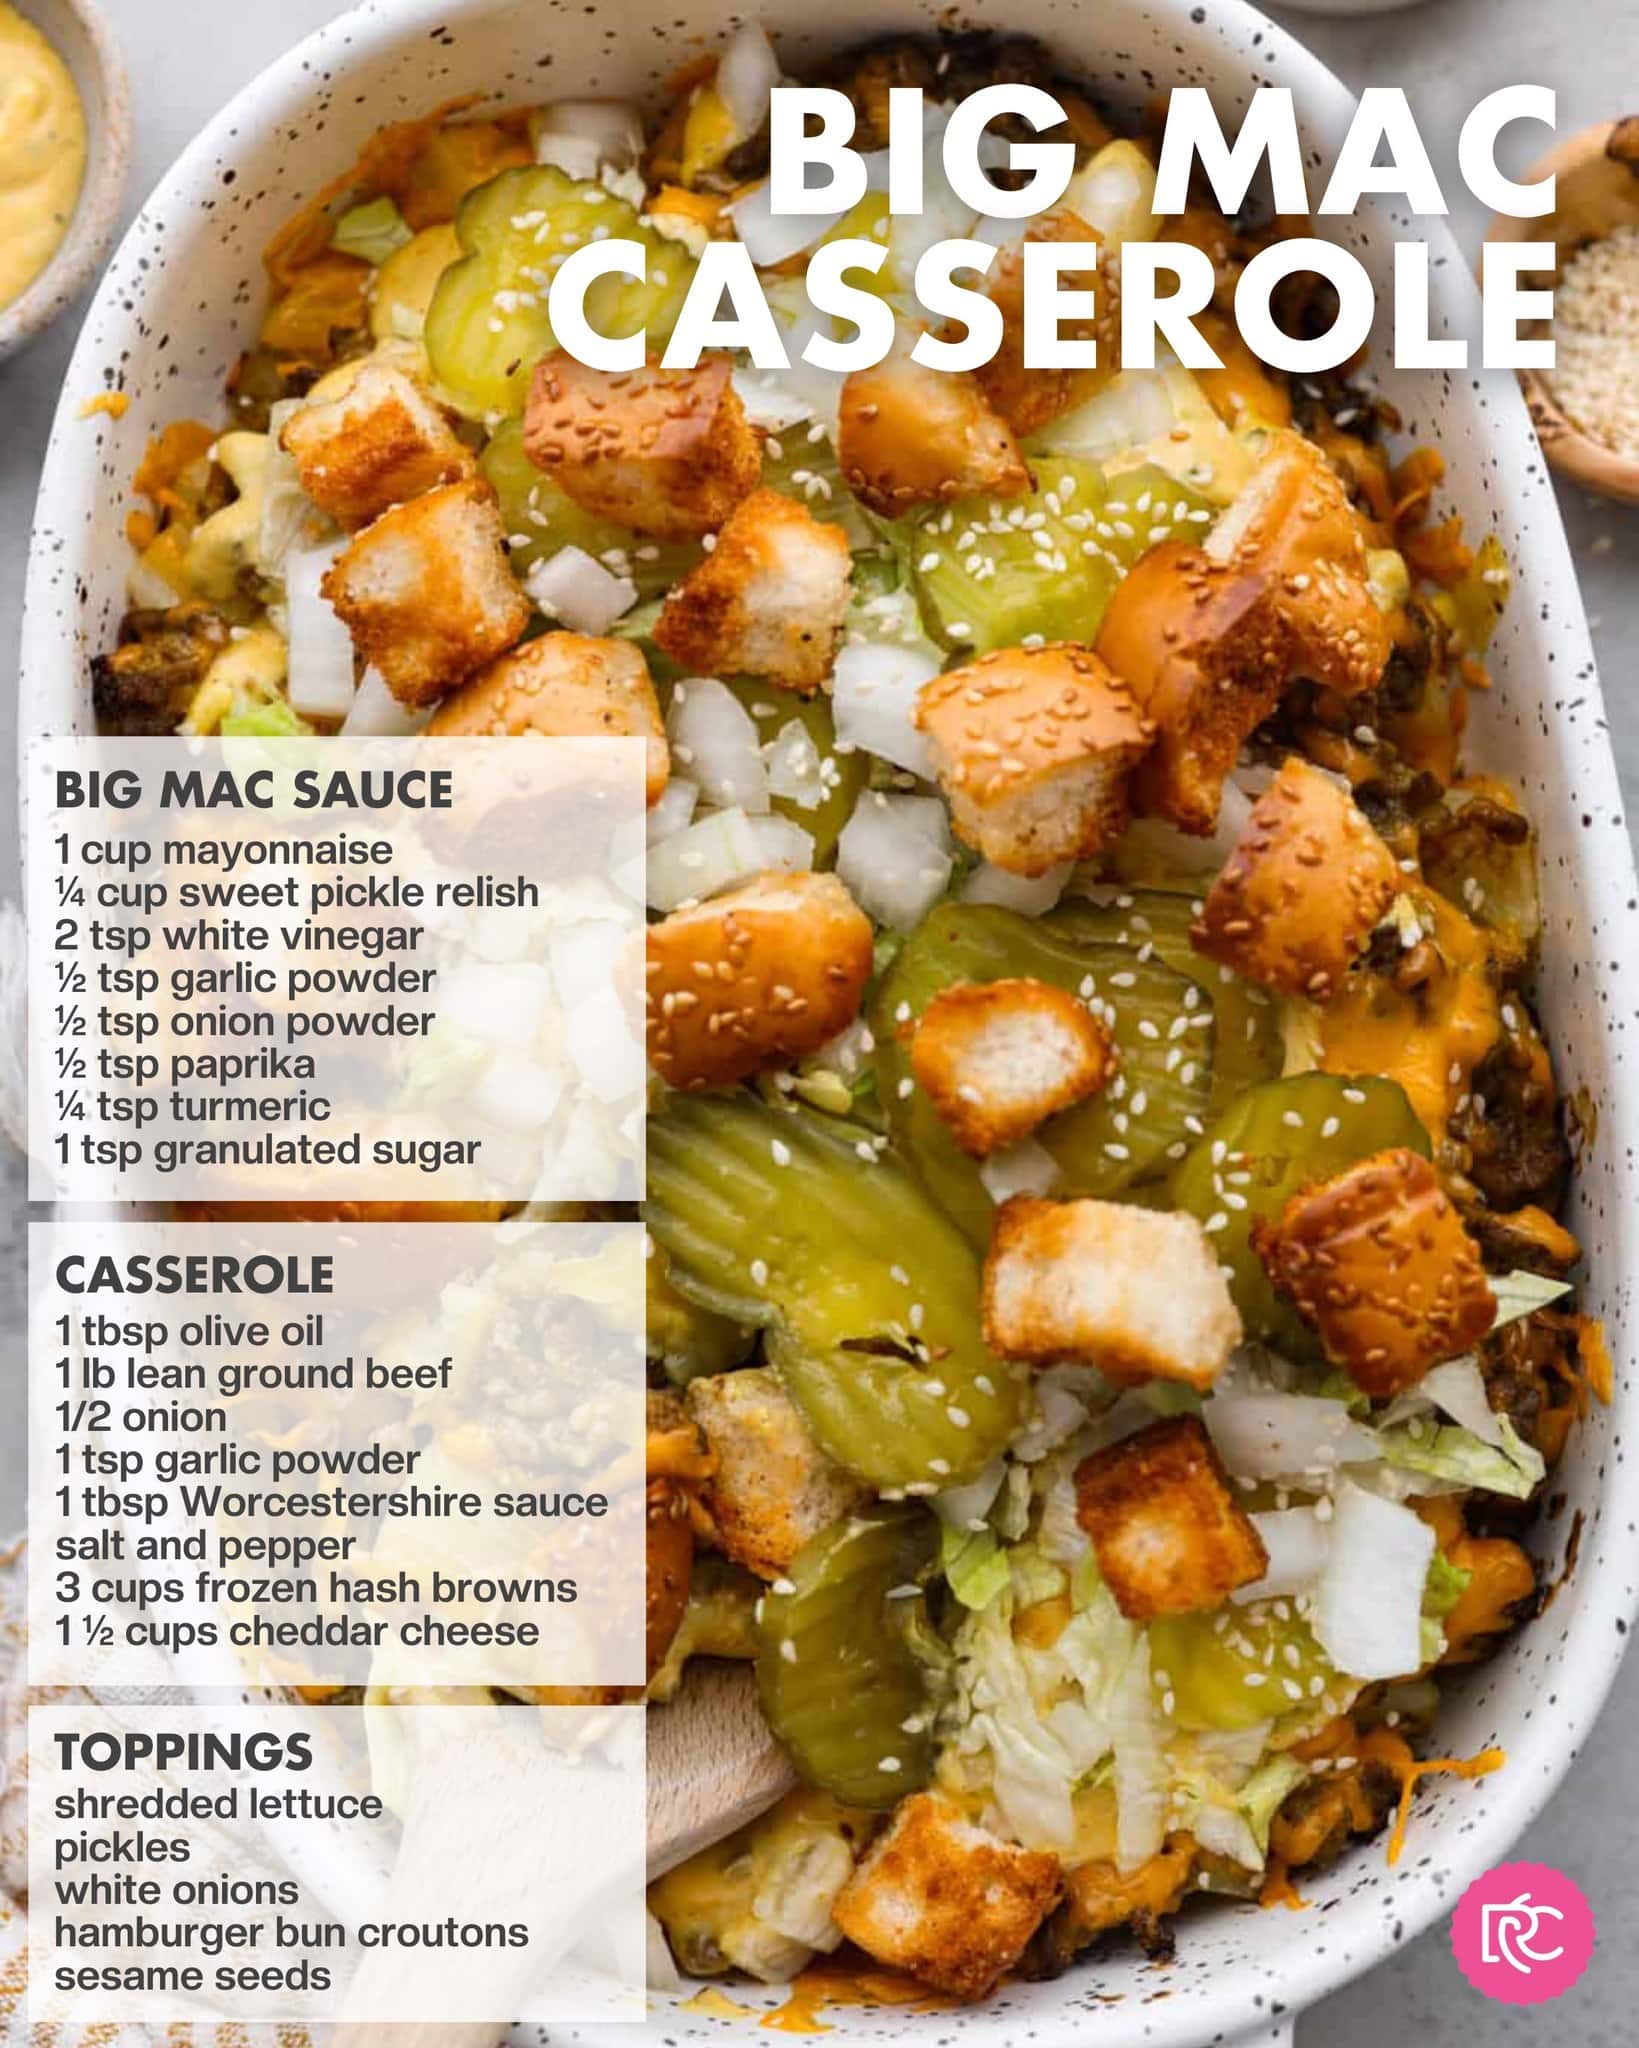 A colorful big mac casserole in a baking dish, topped with hamburger bun croutons and sesame seeds, surrounded by recipe ingredients and text—perfect for busy families.